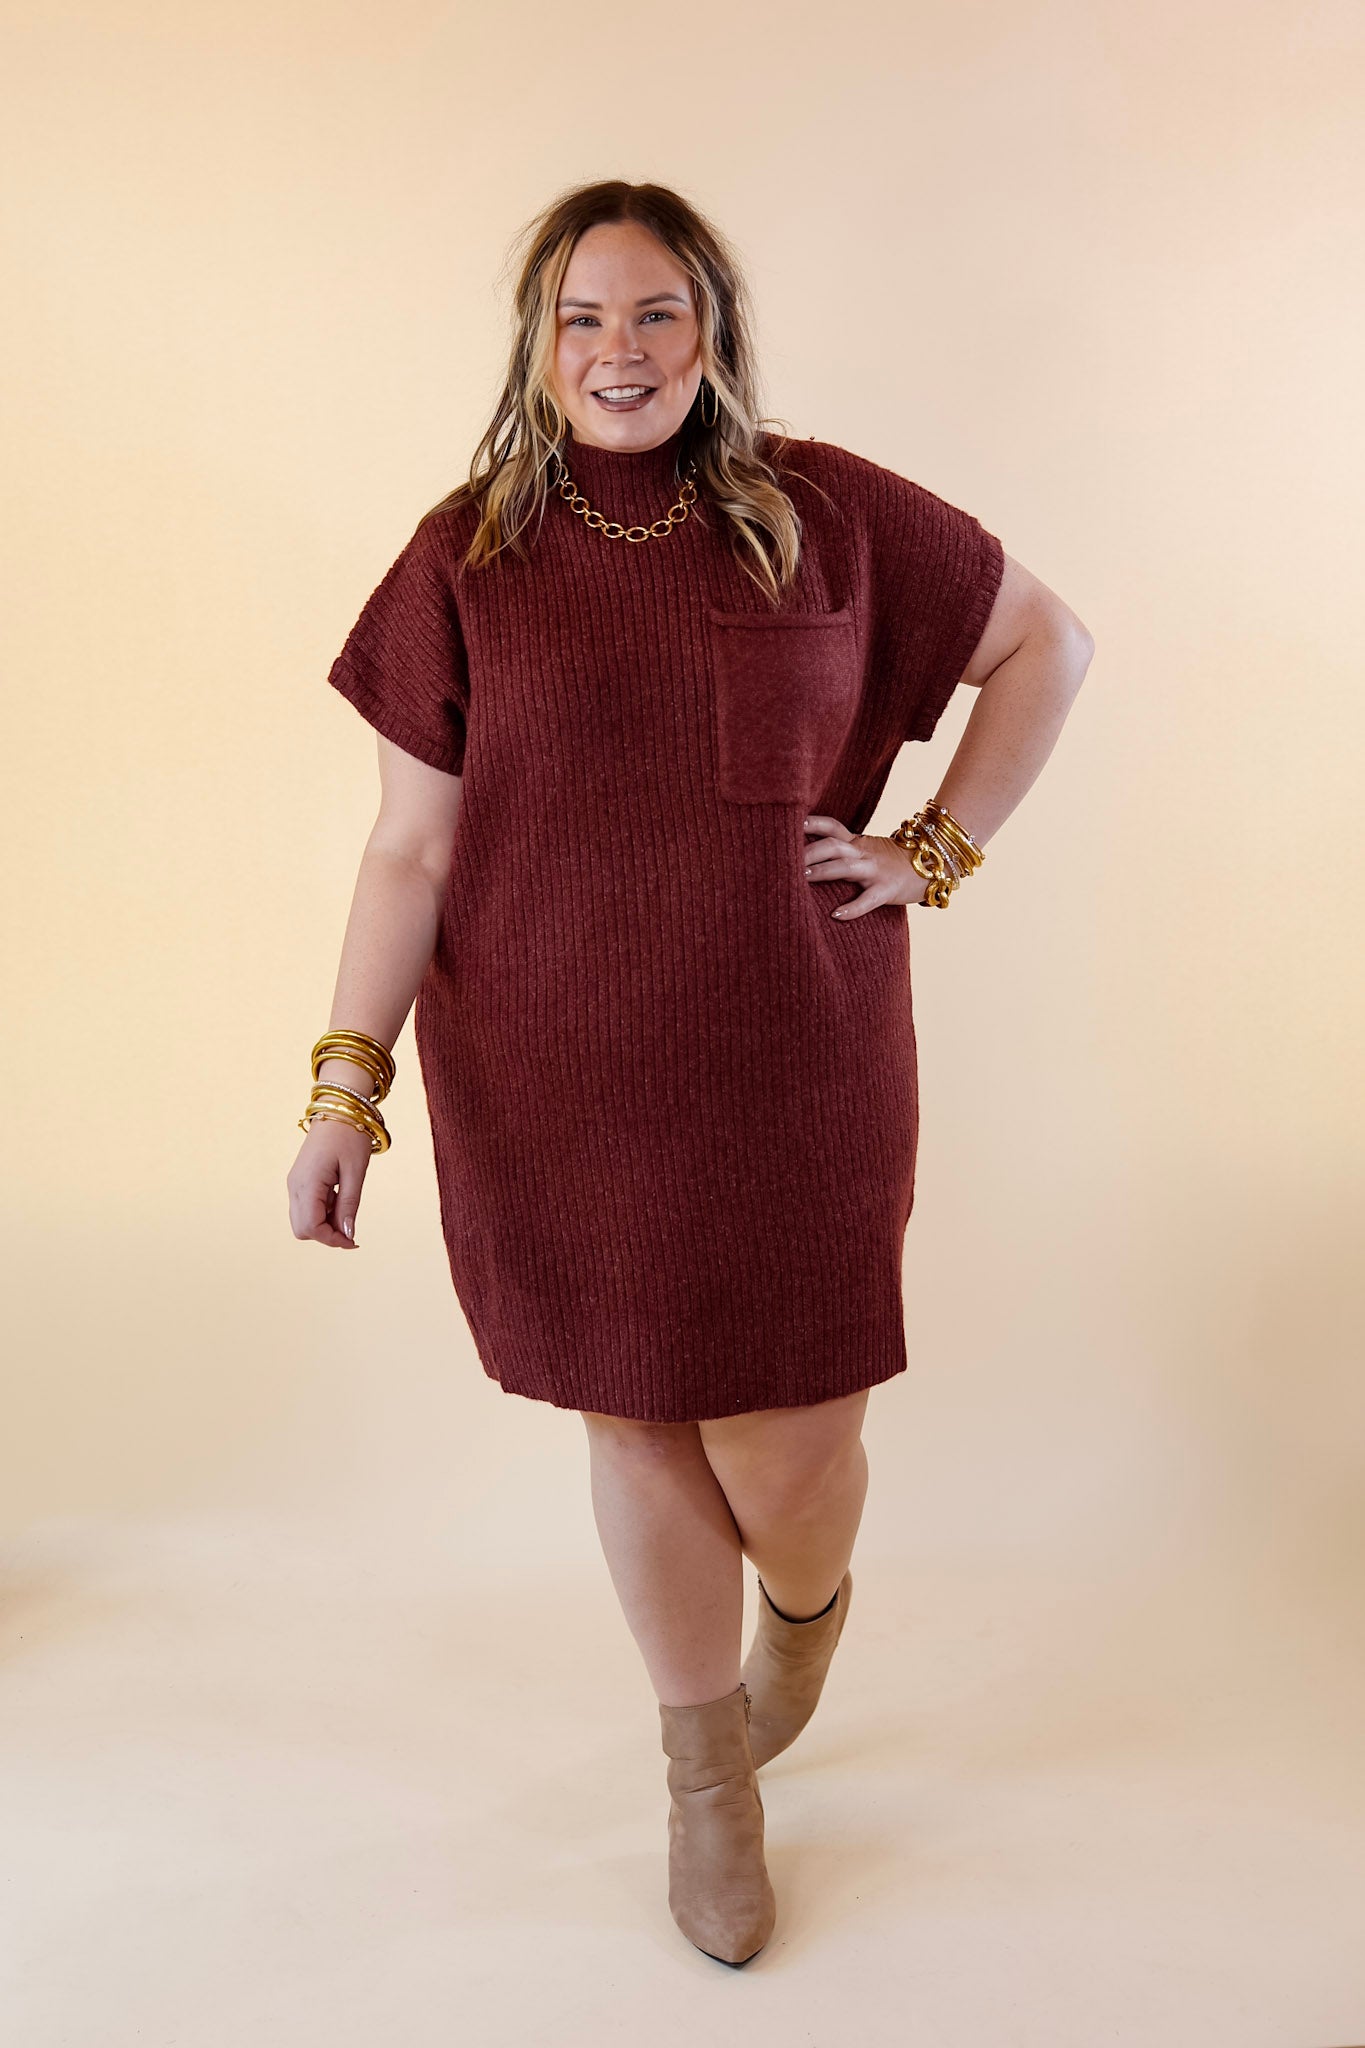 City Sights Cap Sleeve Sweater Dress in Maroon - Giddy Up Glamour Boutique